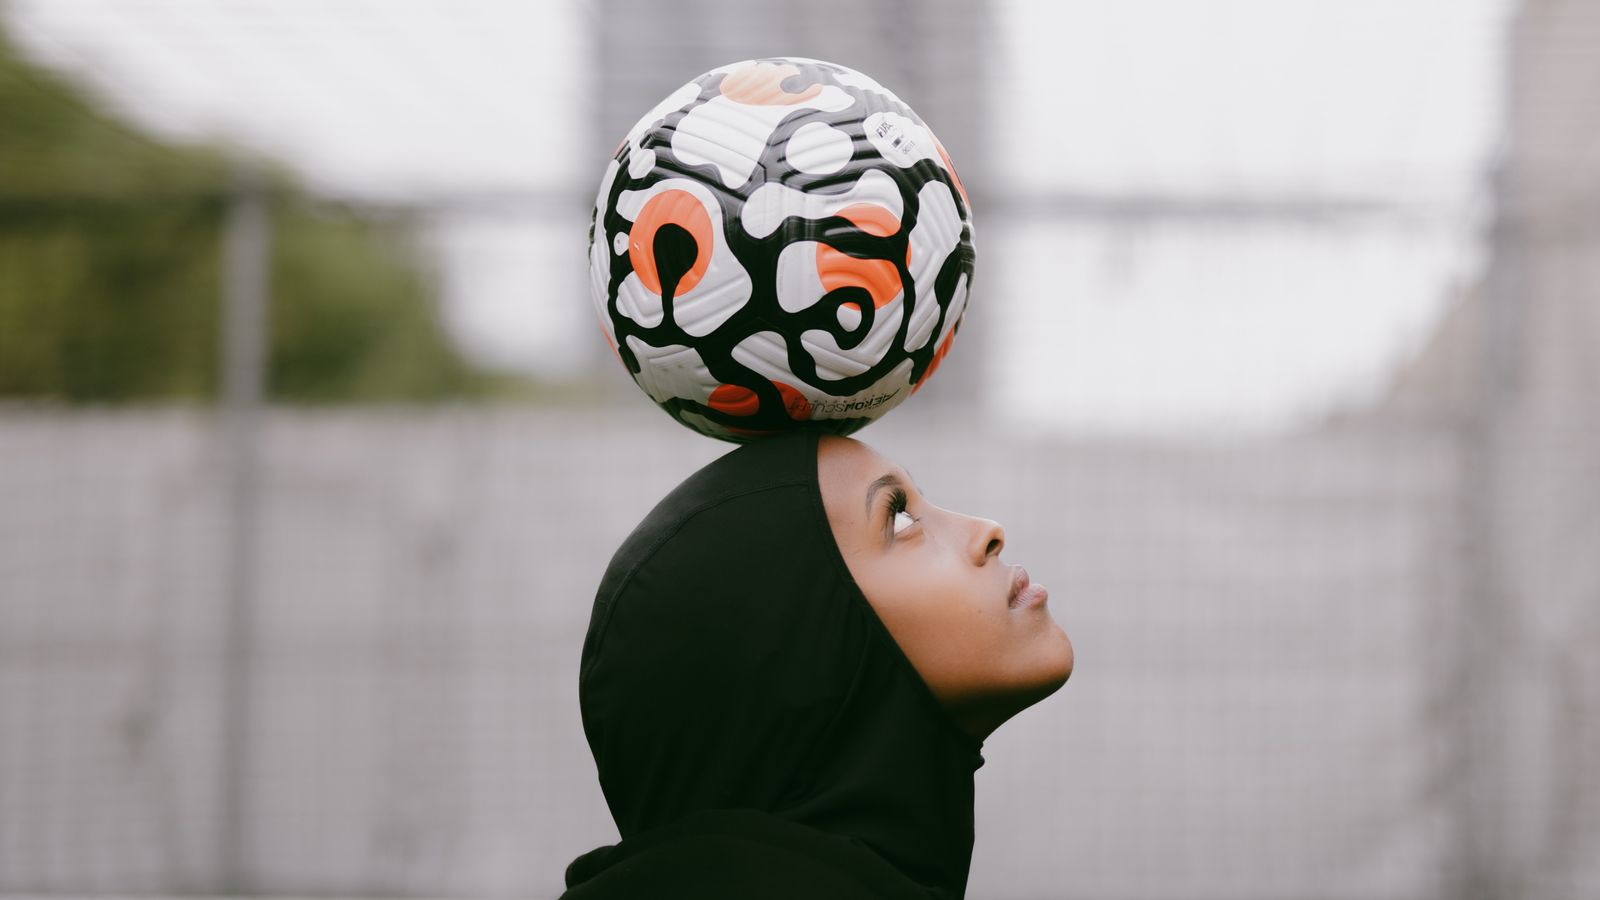 Iqra Ismail exclusive interview: Somali Muslim coach overcoming racism to inspire women to play football